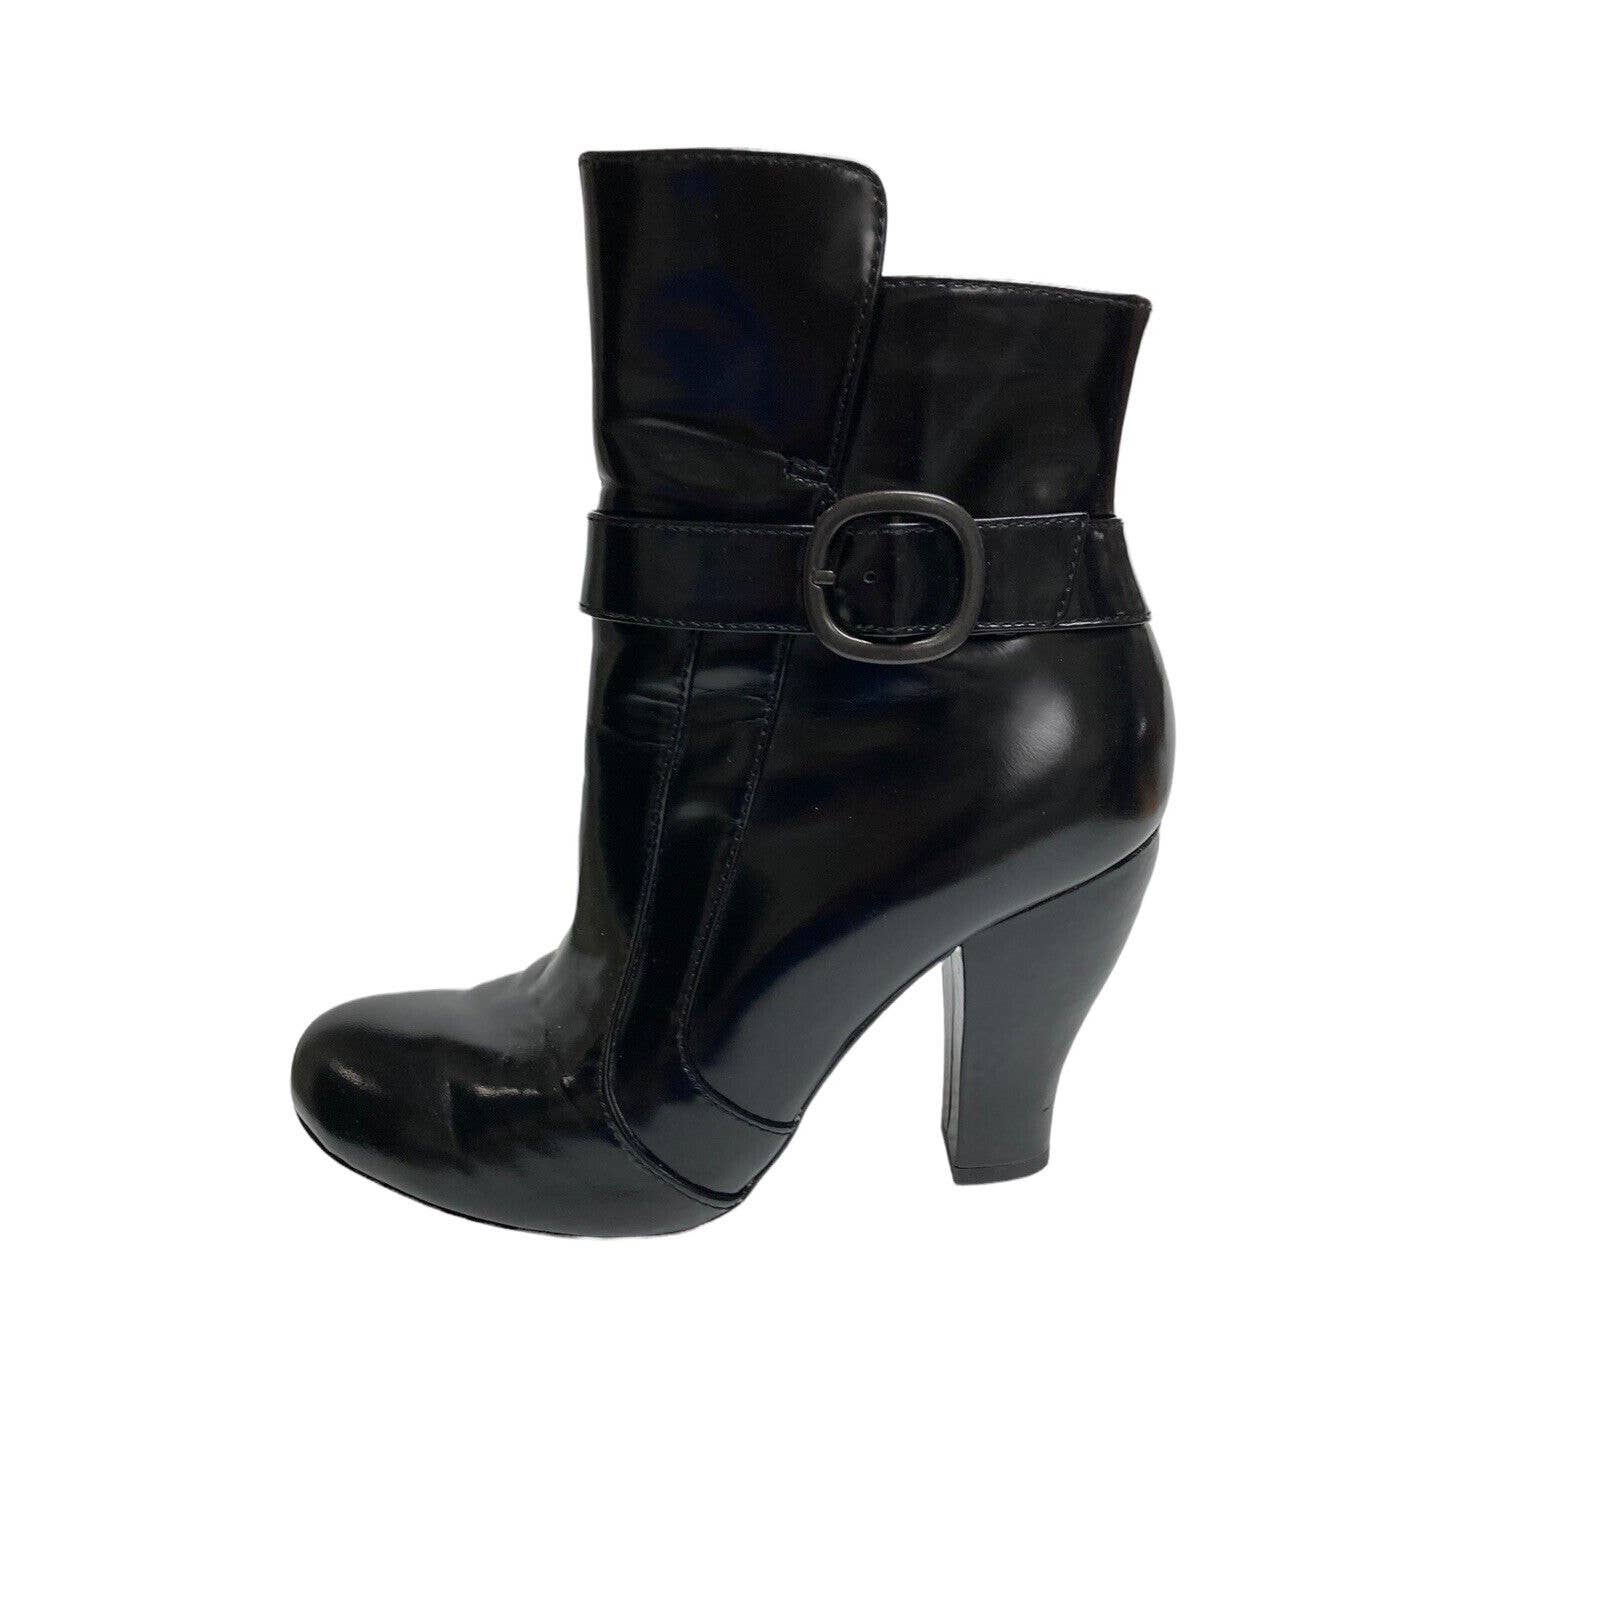 Black Leather Boots For Women | Not Your Grandma's Vintage & More